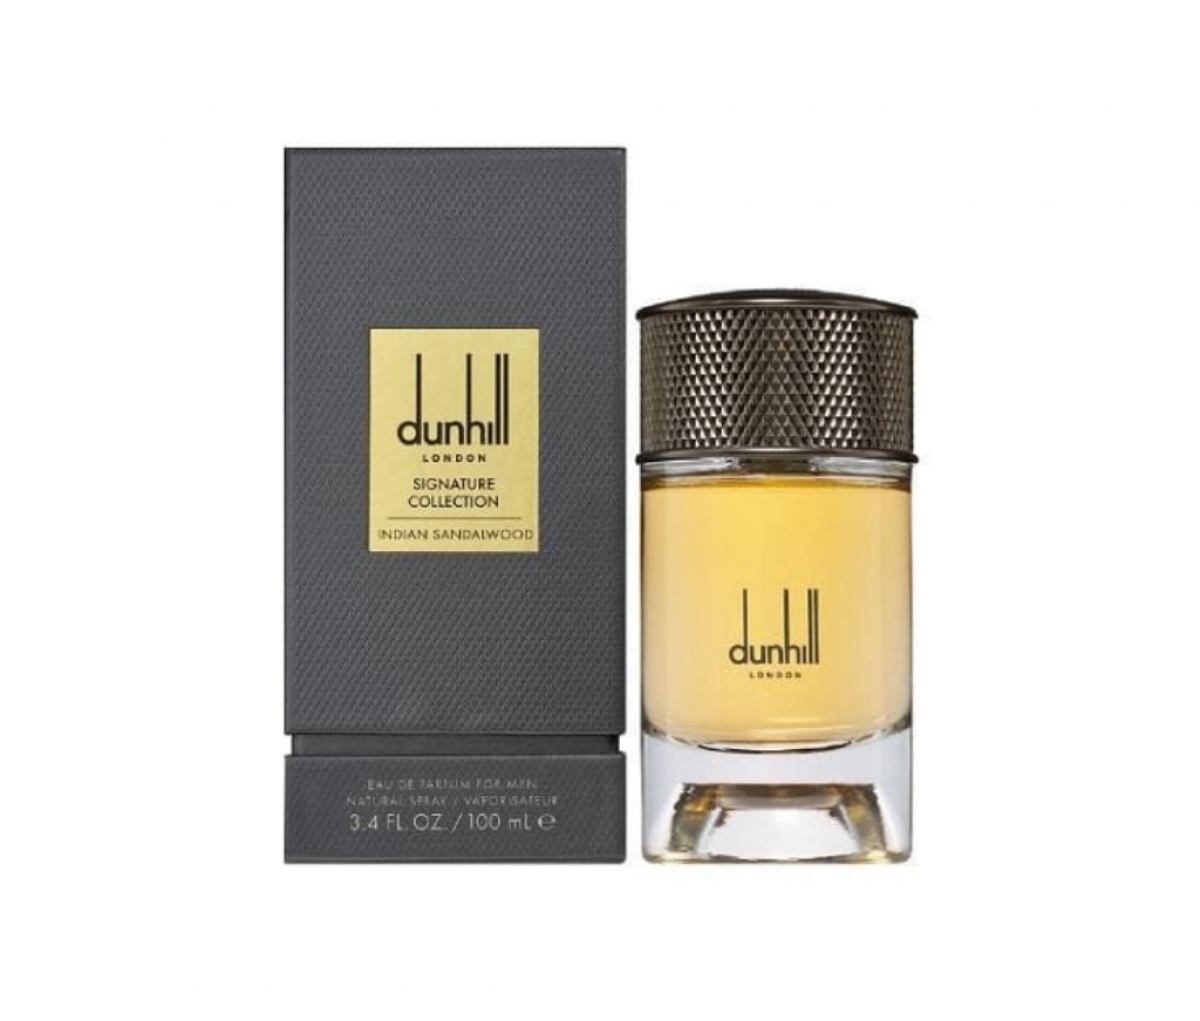 DUNHILL SIGNATURE COLLECTION INDIAN SANDALWOOD (M) EDP 100ML